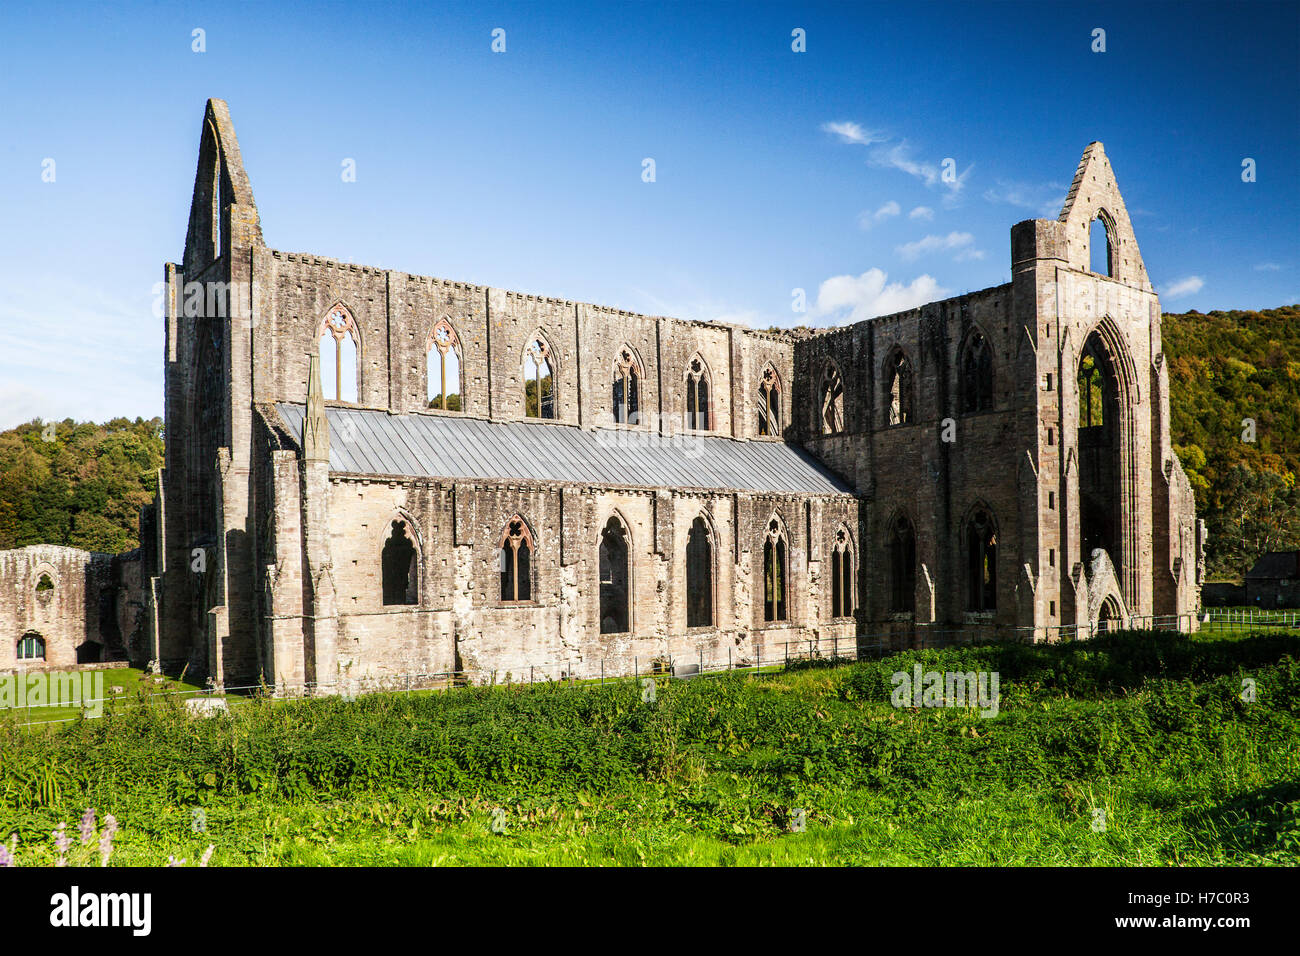 Tintern Abbey in Monmouthshire, Wales. Stock Photo